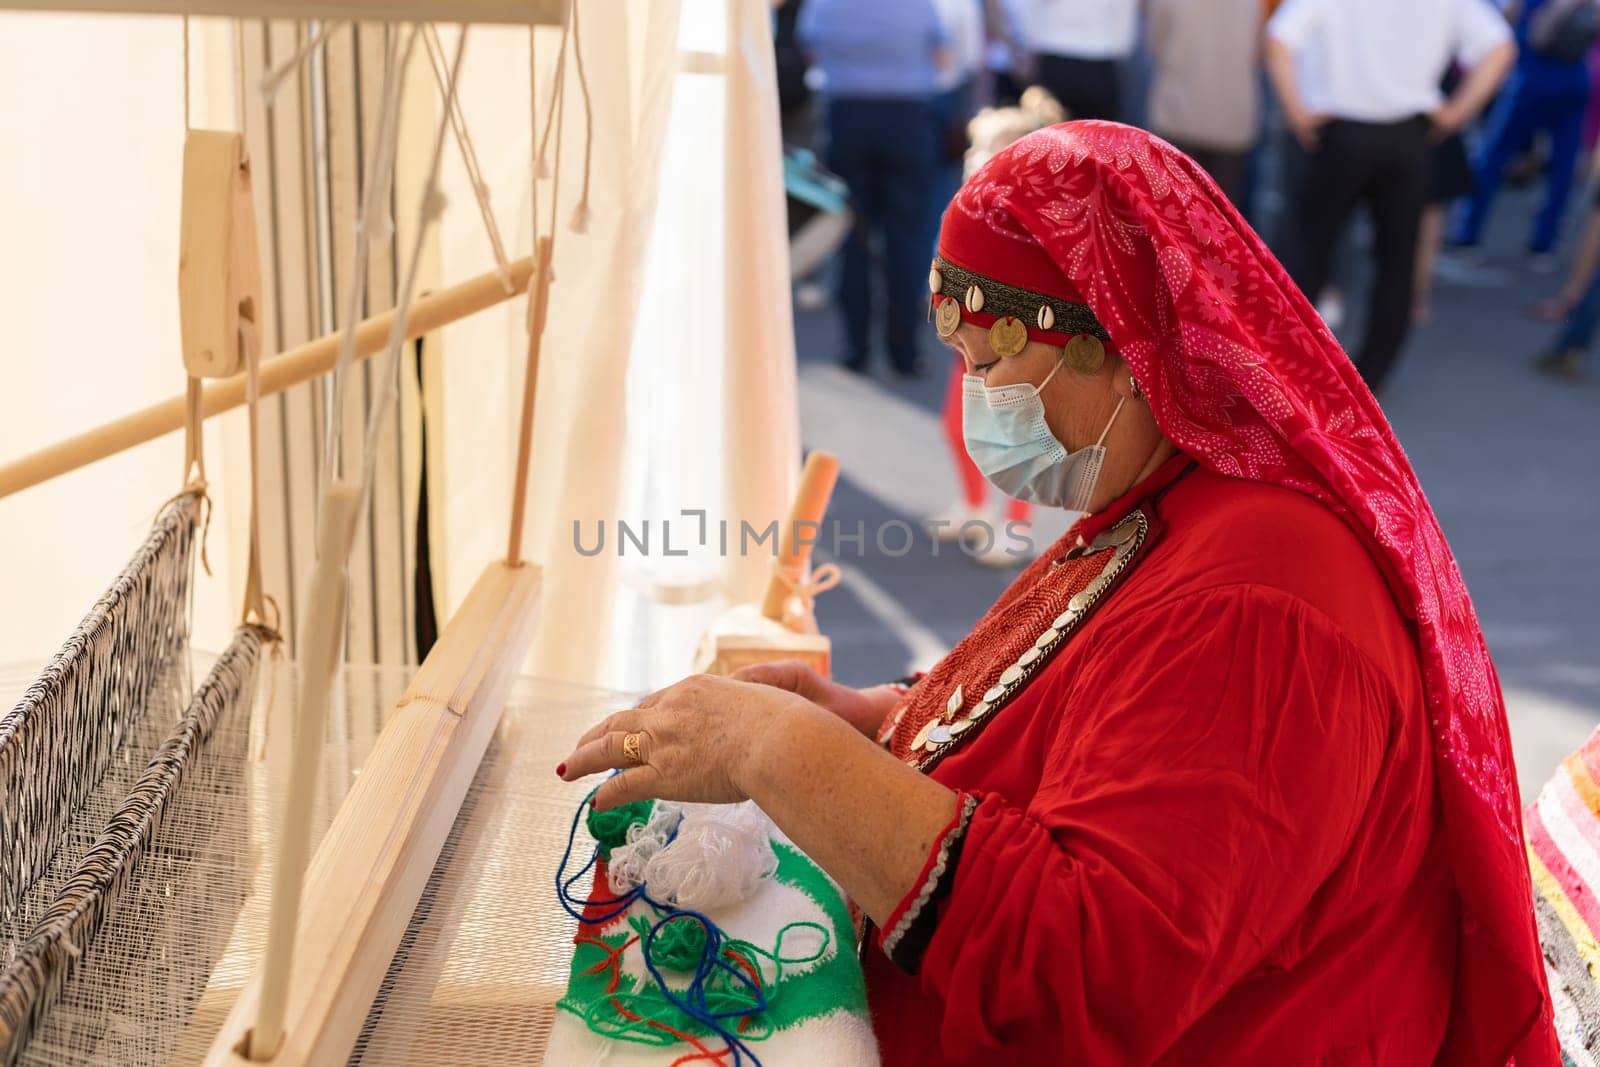 UFA, RUSSIA - JULY 10, 2021: Bashkir woman knitted national clothes during Folkloriada in Ufa by Satura86